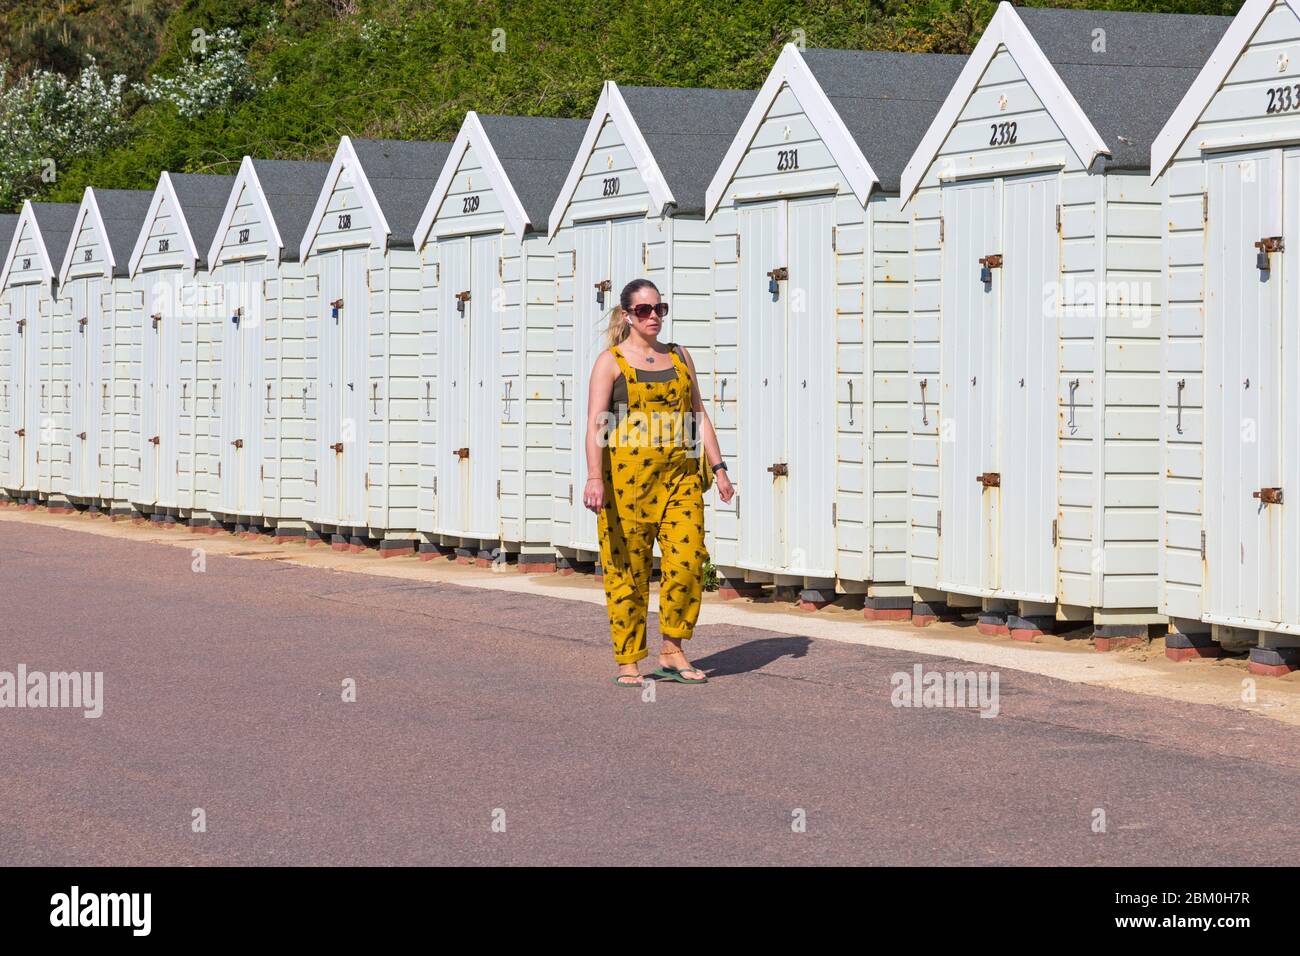 Bournemouth, Dorset UK. 6th May 2020. UK weather: lovely warm sunny day with temperatures rising ready for the long bank holiday weekend.  Beaches are mainly deserted with people taking their permitted exercise at the seaside, most adhering to the Coronavirus guidelines.  Woman walking along promenade past beach huts. Credit: Carolyn Jenkins/Alamy Live News Stock Photo